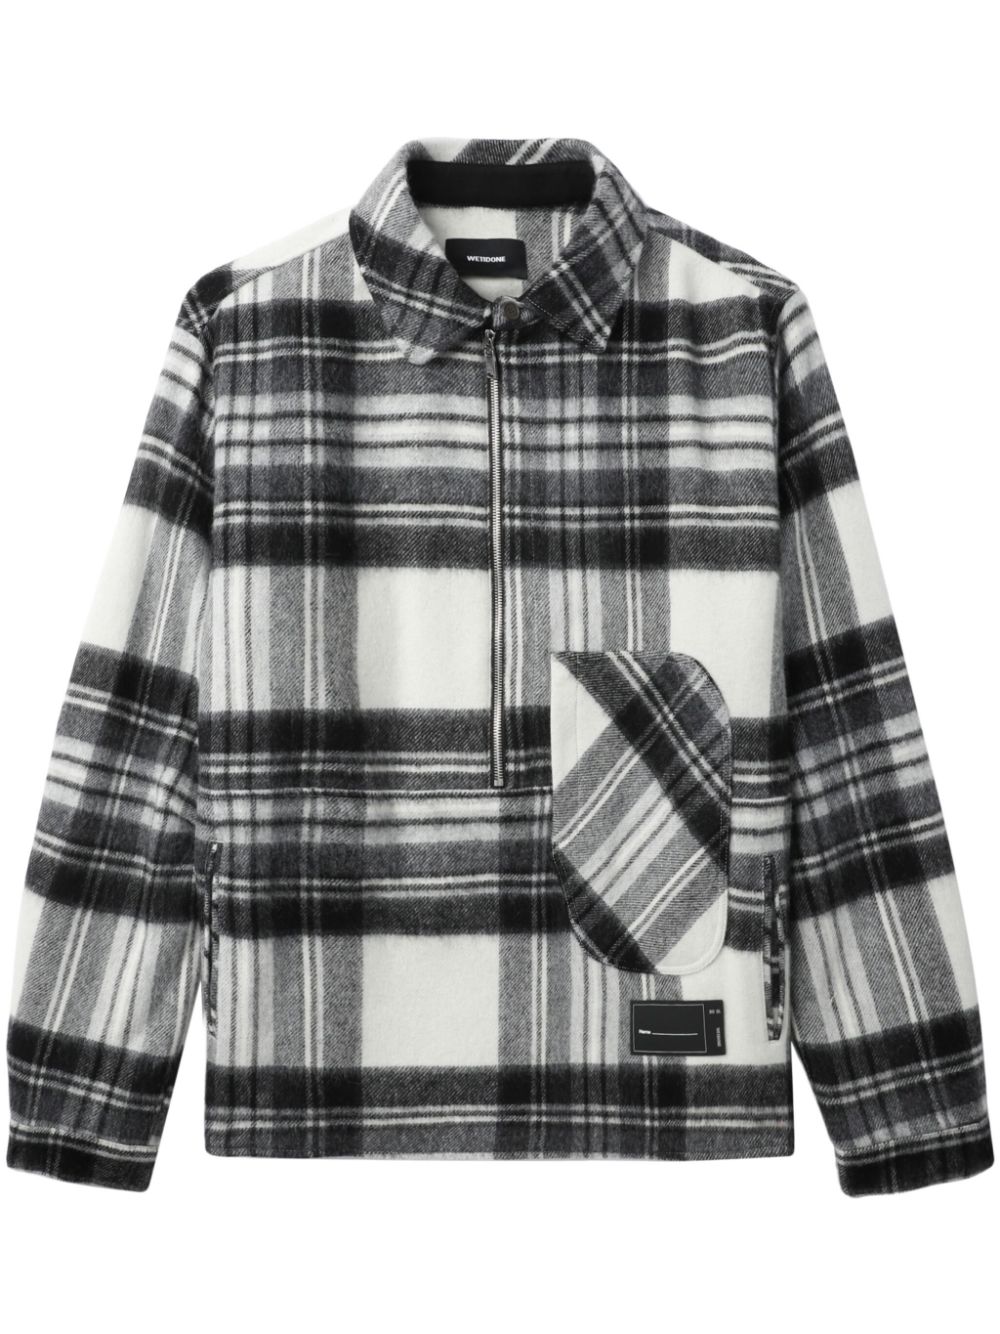 WE11 DONE PLAID CHECK-PATTERN FLANNEL SHIRT